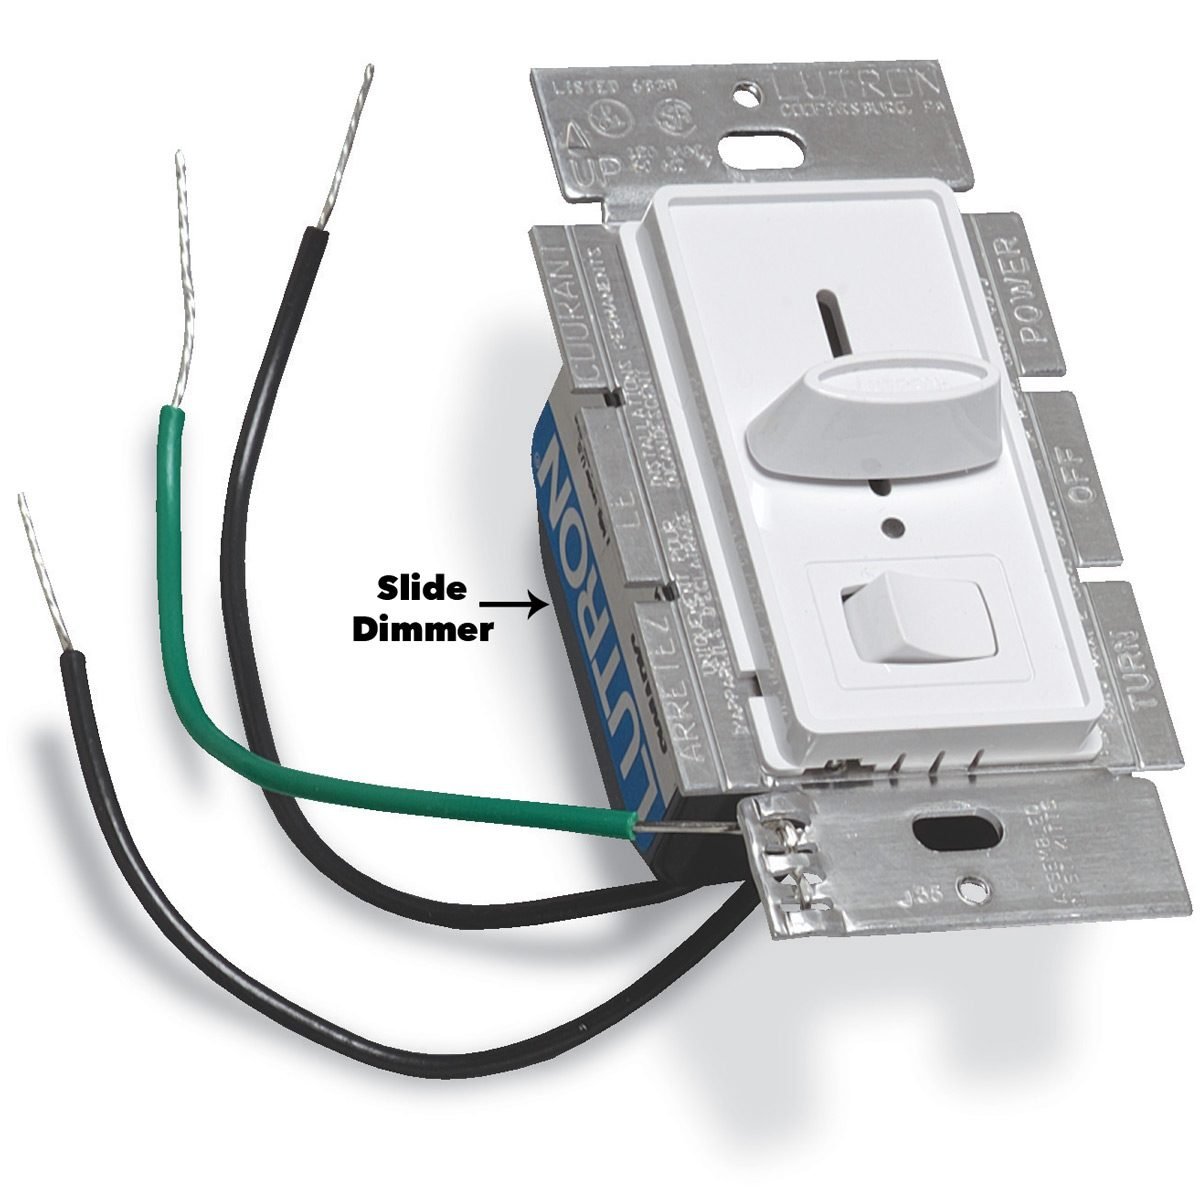 Inline Dimmer Switch For Lamp Wiring Diagram from www.familyhandyman.com